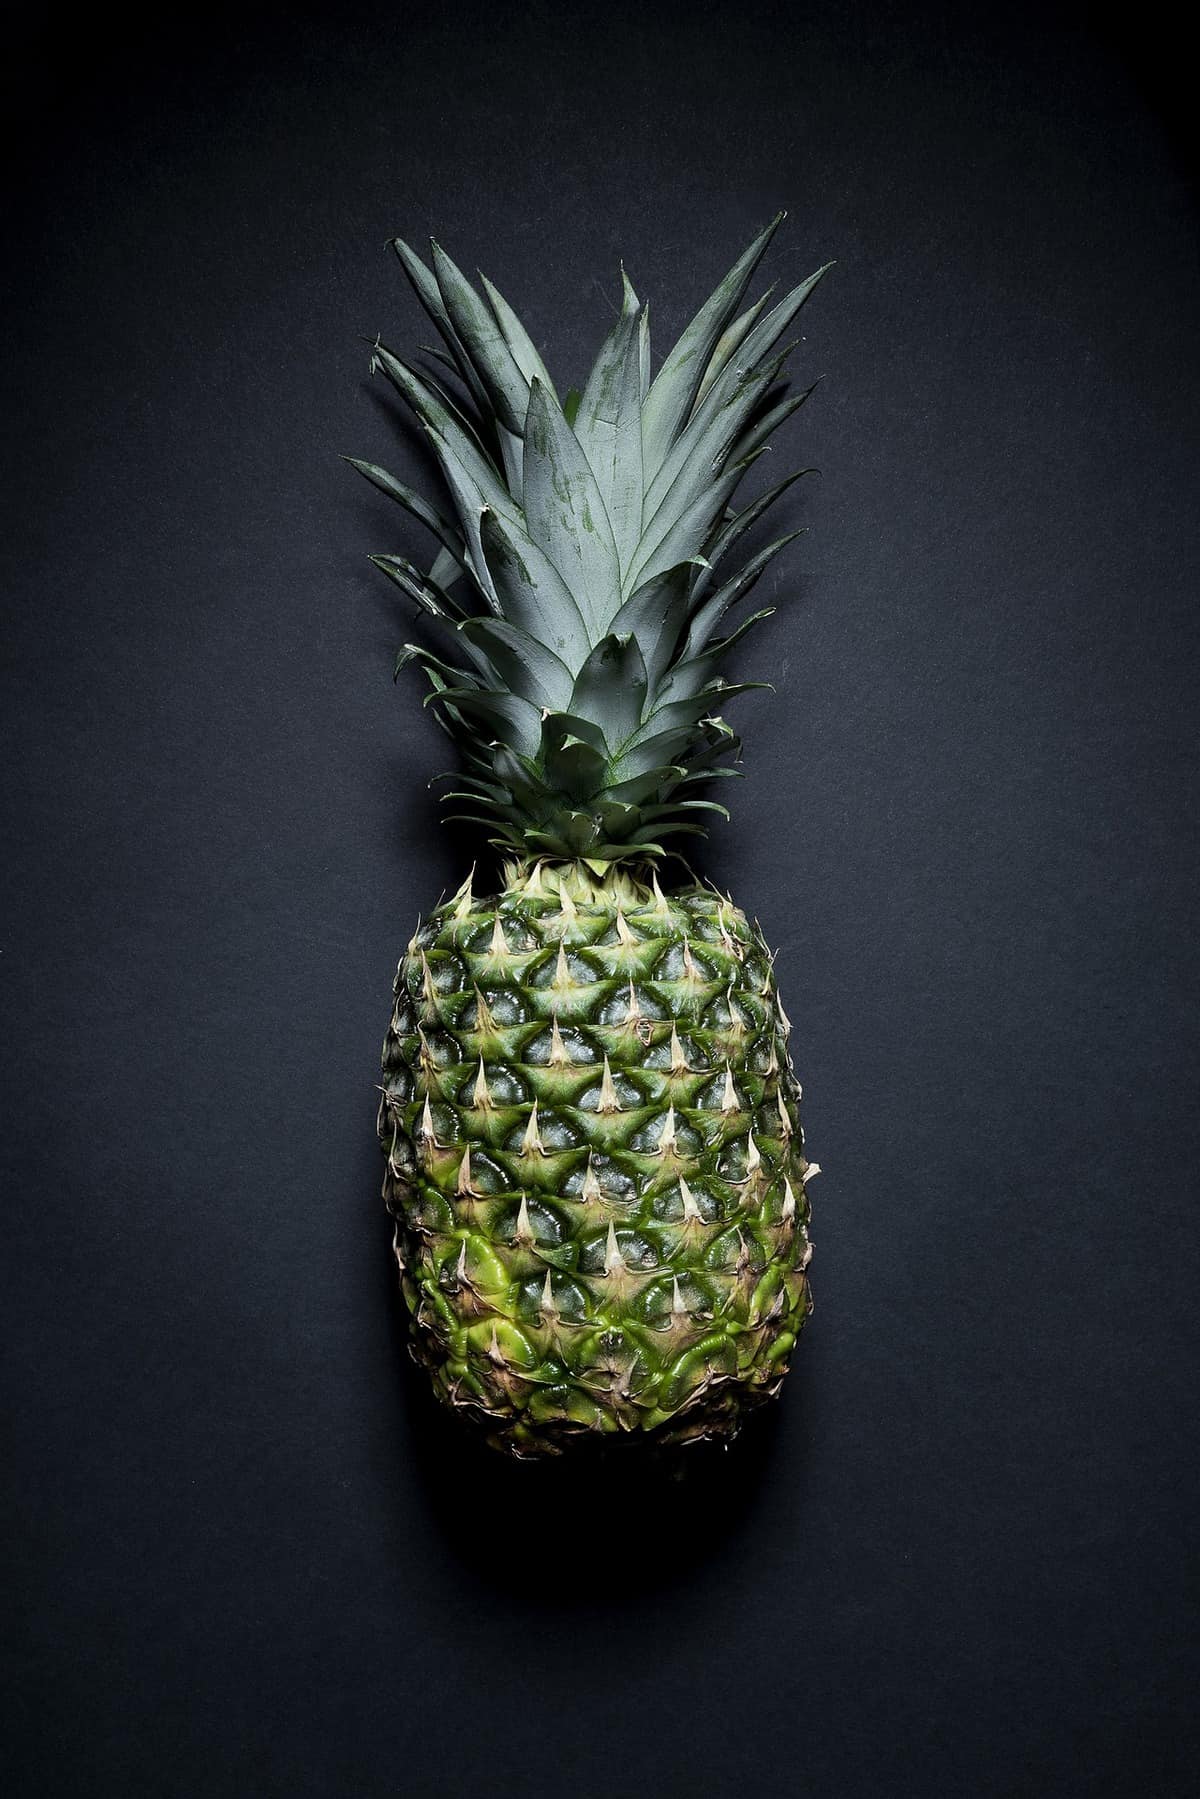 Pineapple on a black surface.